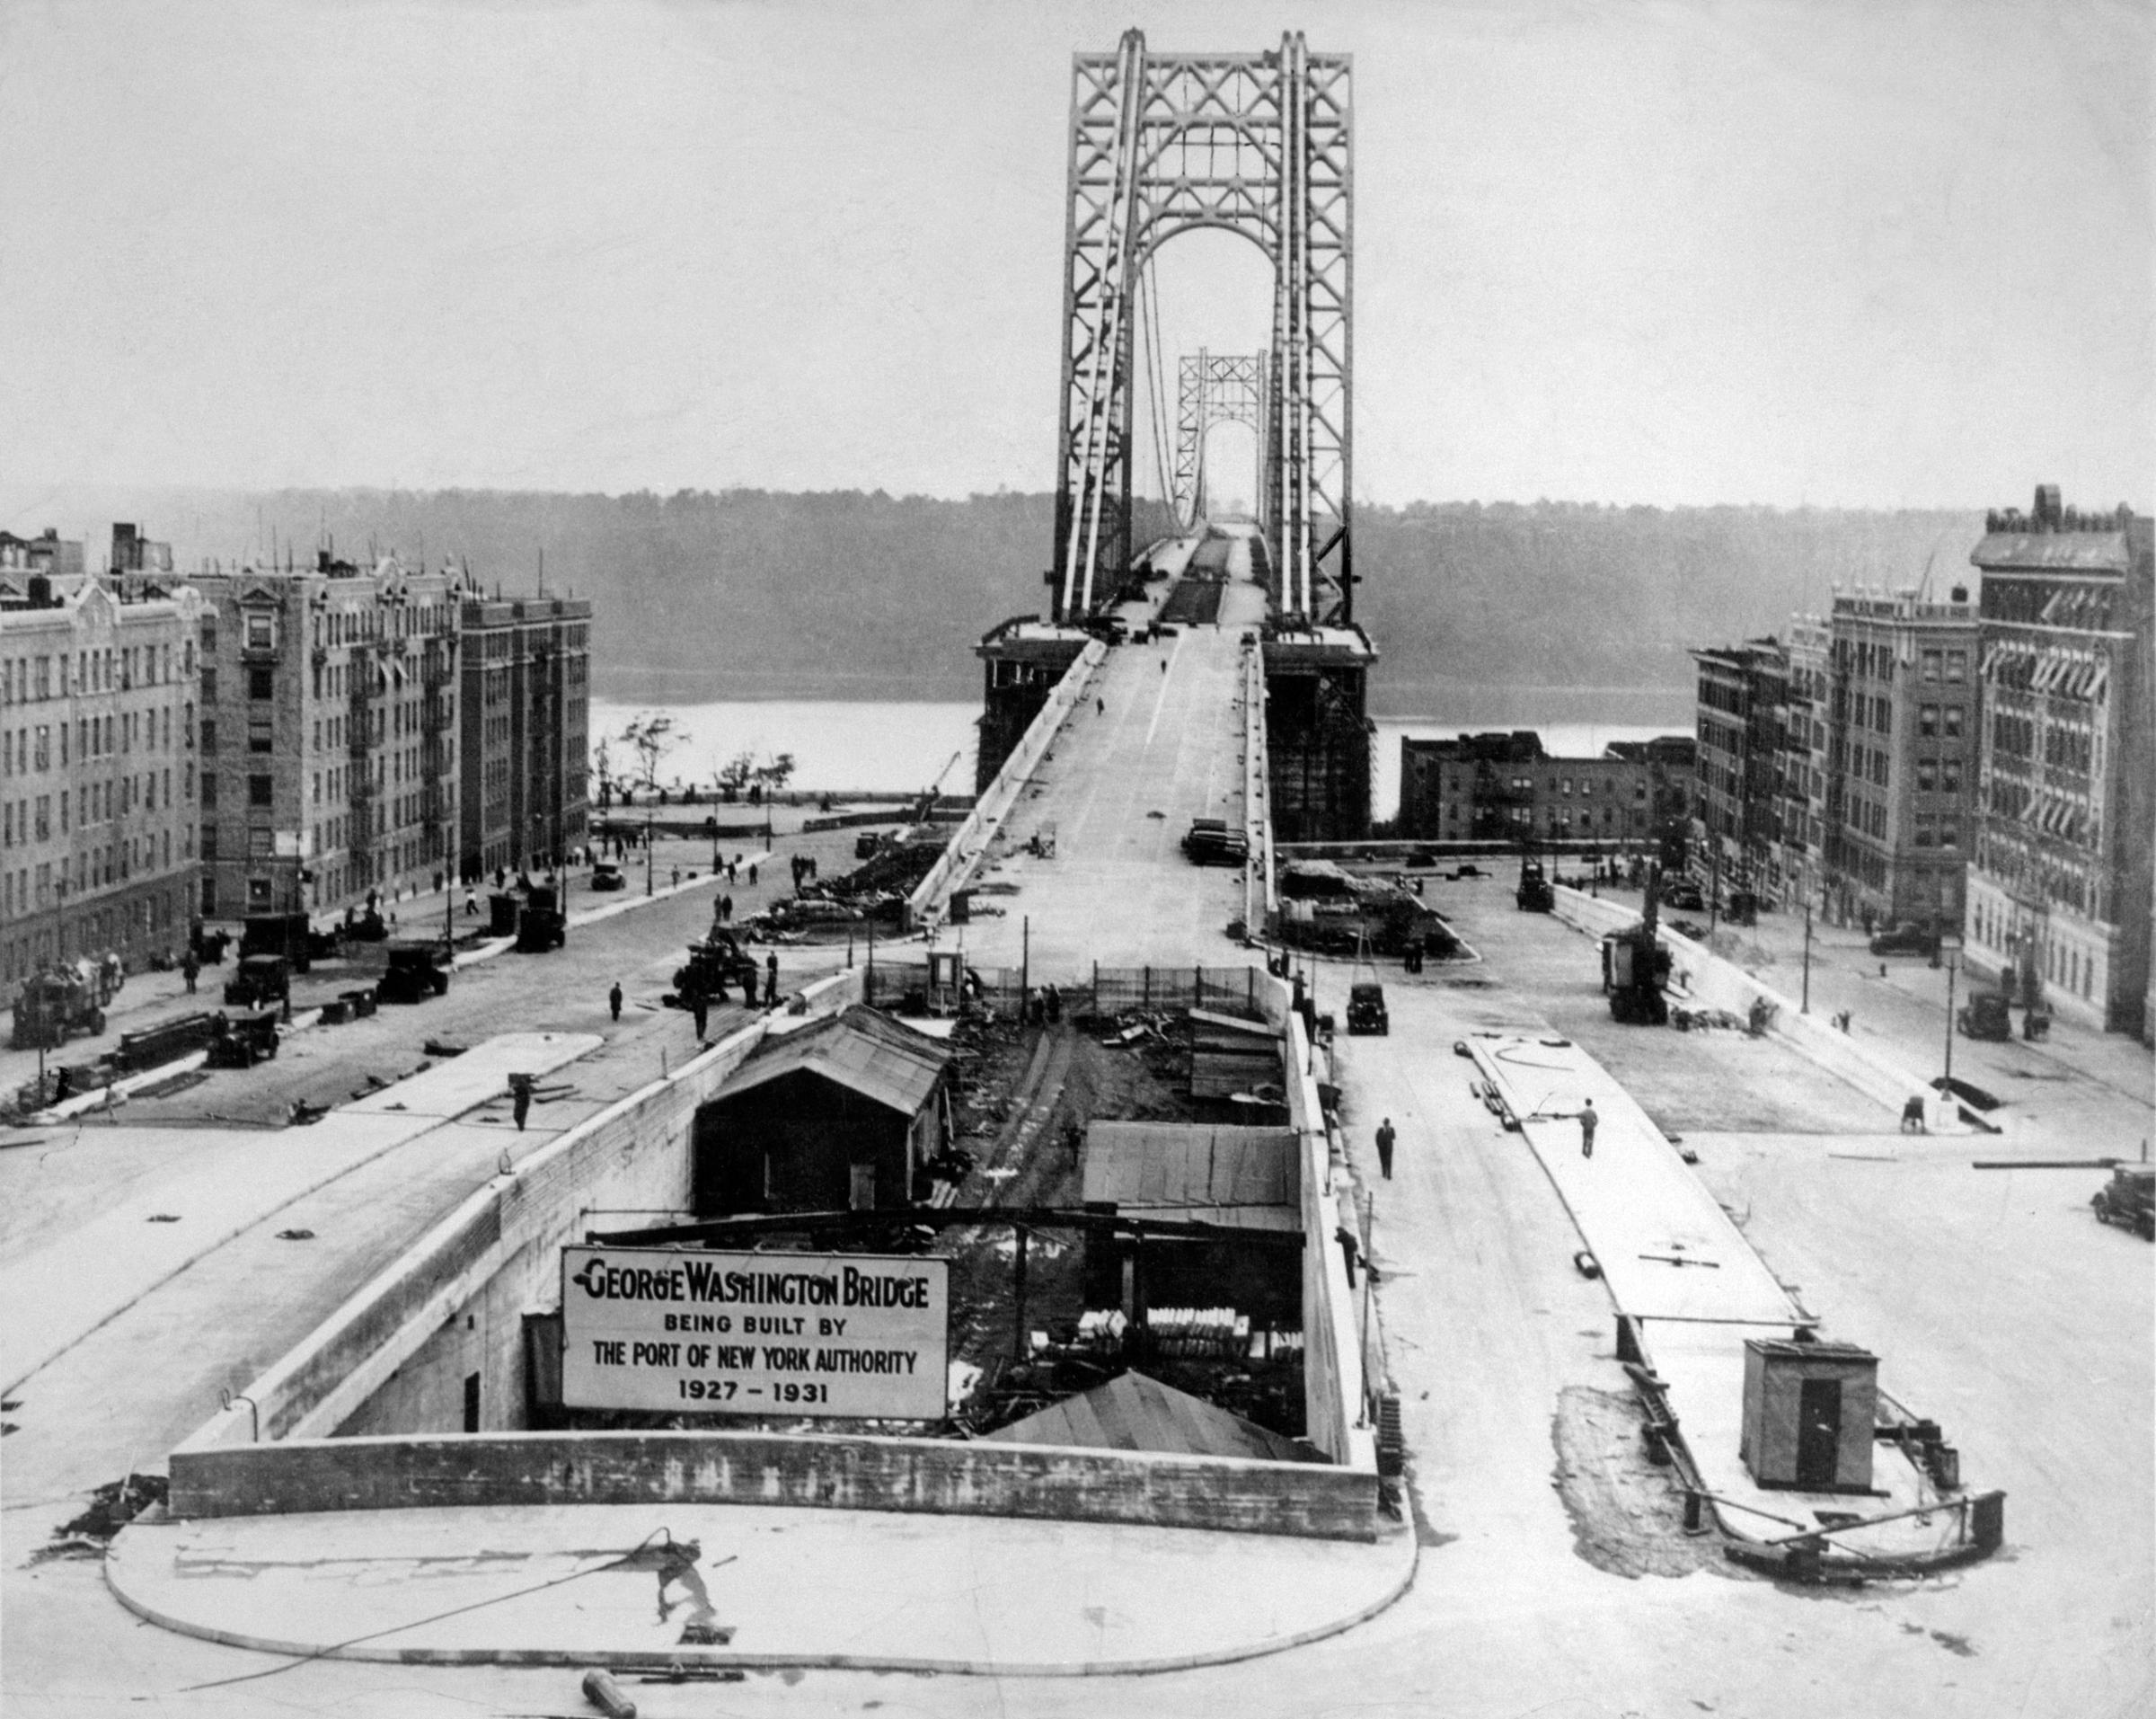 10/19/1931-New York- THE ROAD'S CLEAR...That will be the signal when the new Washington Memorial Bridge over the Hudson River is opened with appropriate ceremony. In the meantime, here's a new and unusual view of the structure from the New York end, showing the underground approach as well as the one on the surface and the exit. That's New Jersey over in the distance.